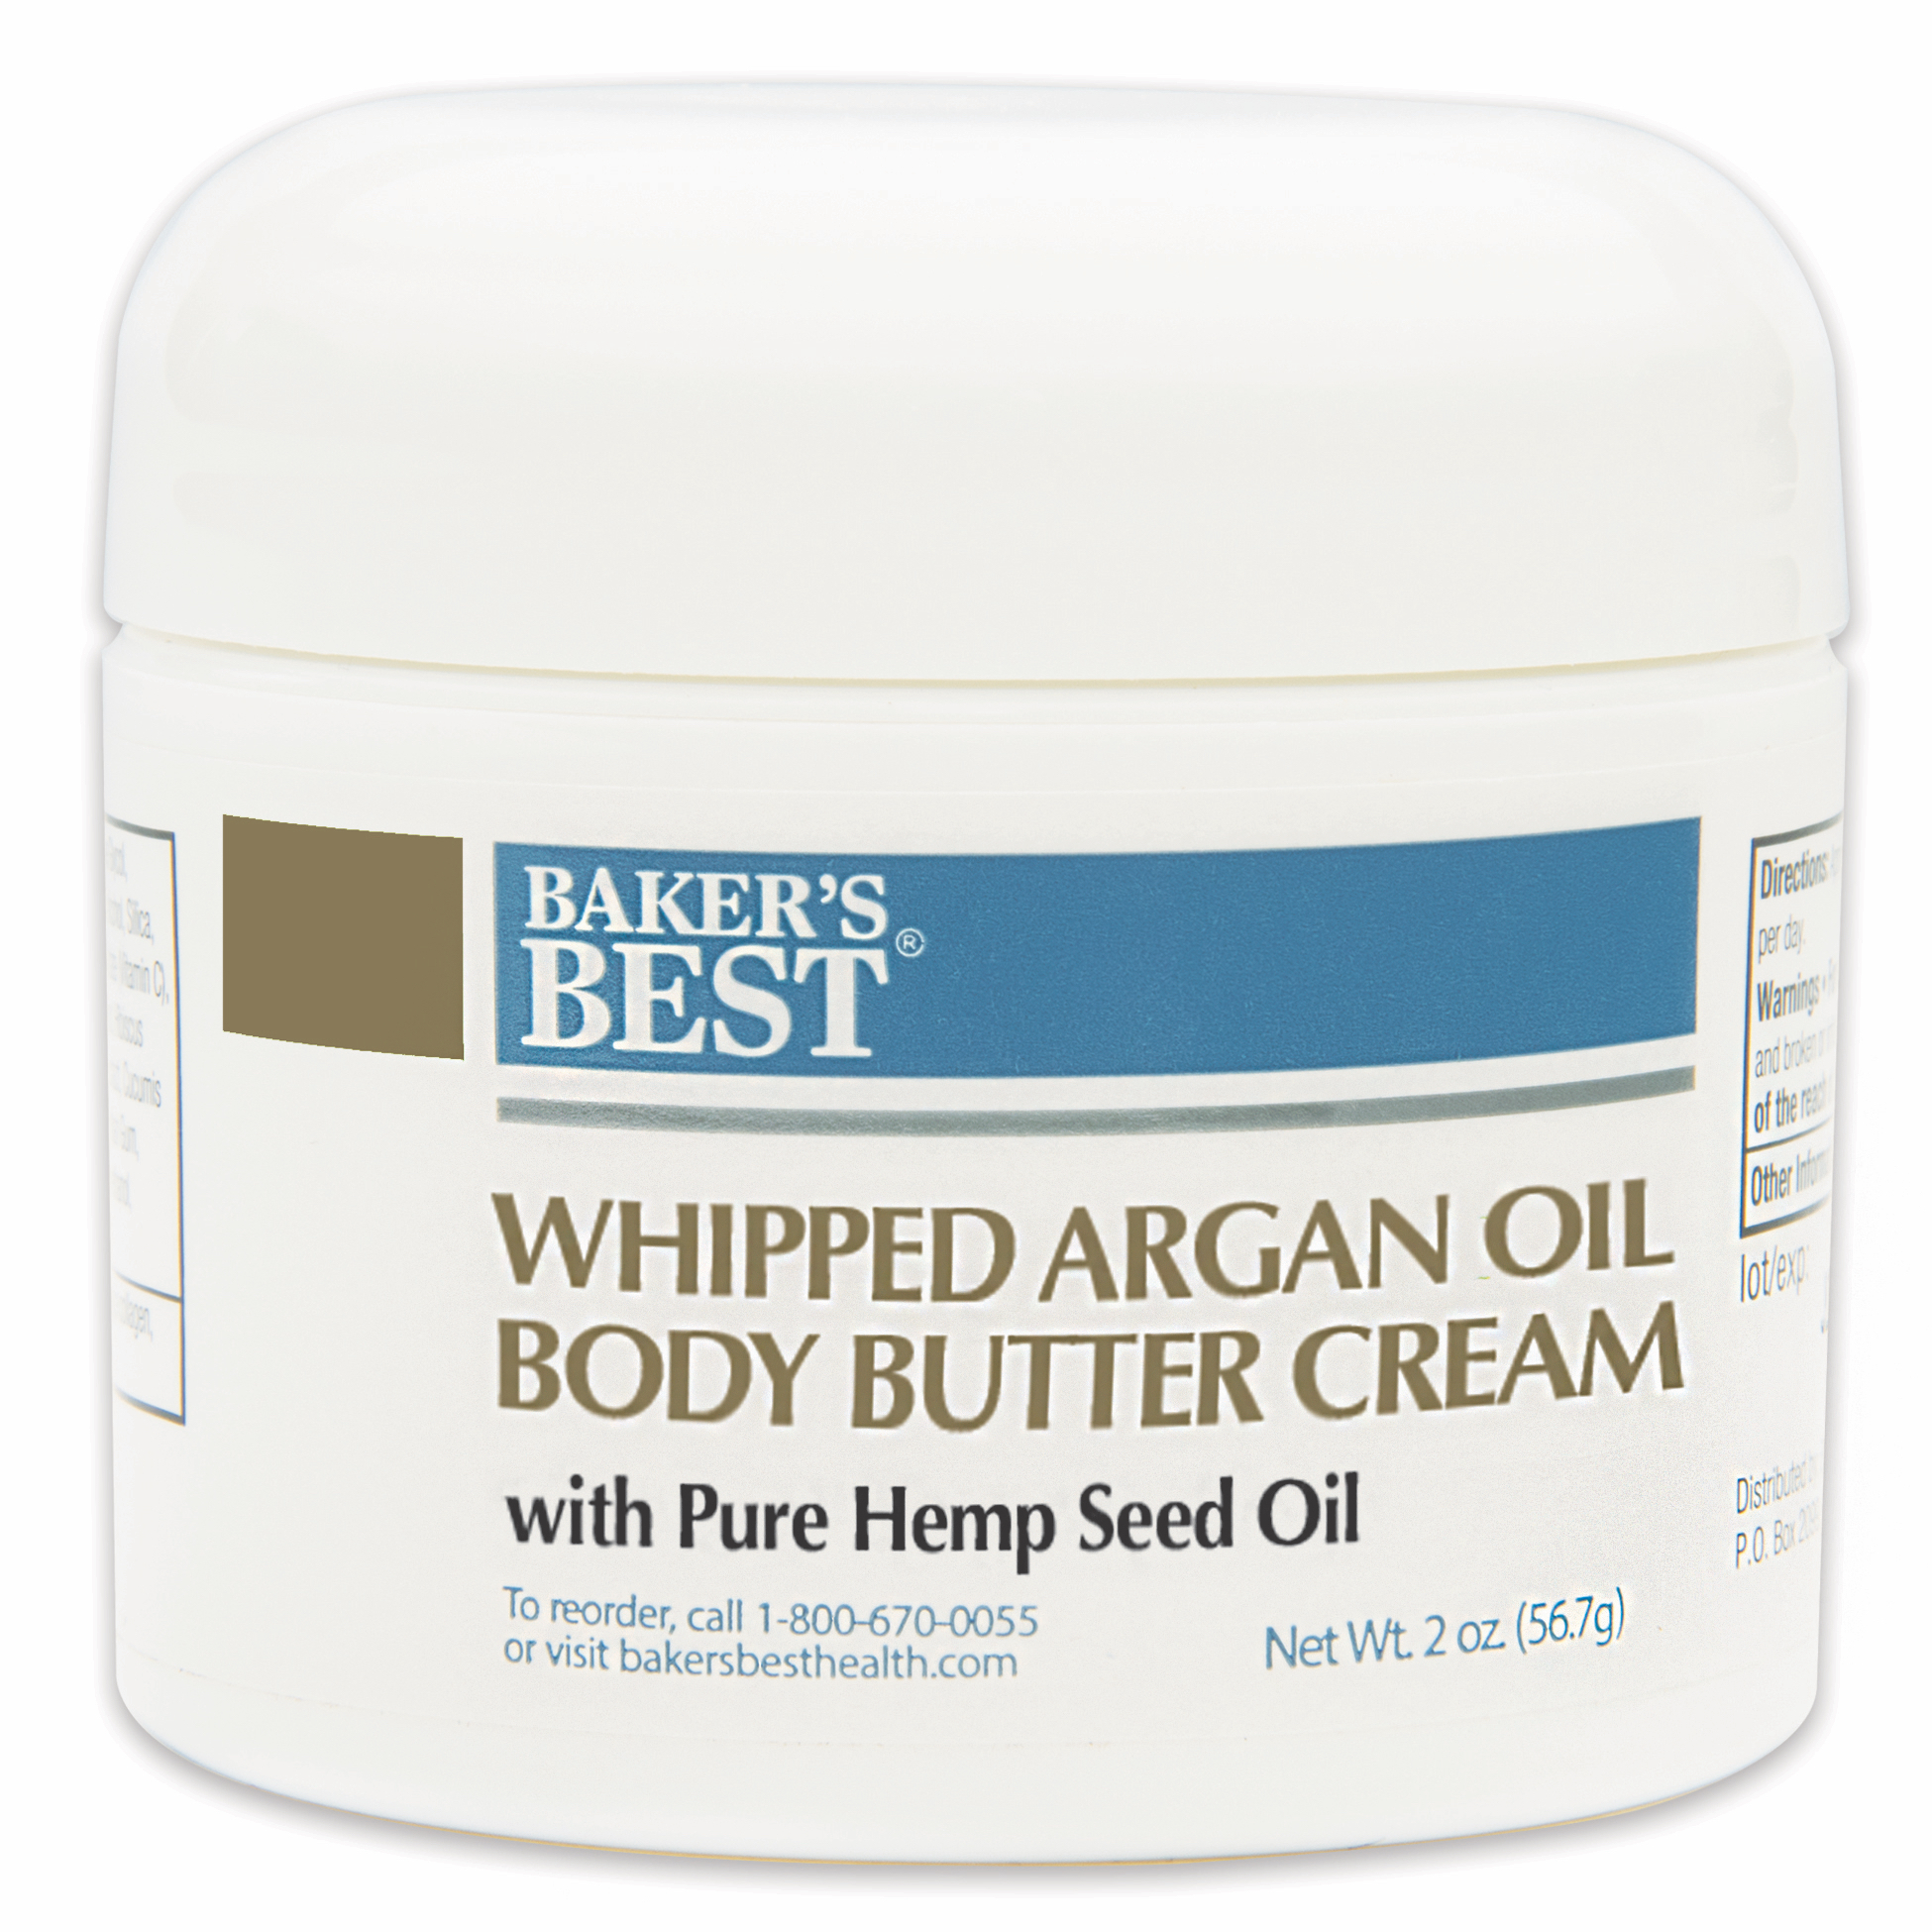 Whipped Argan Oil Body Butter Cream with Pure Hemp Seed Oil